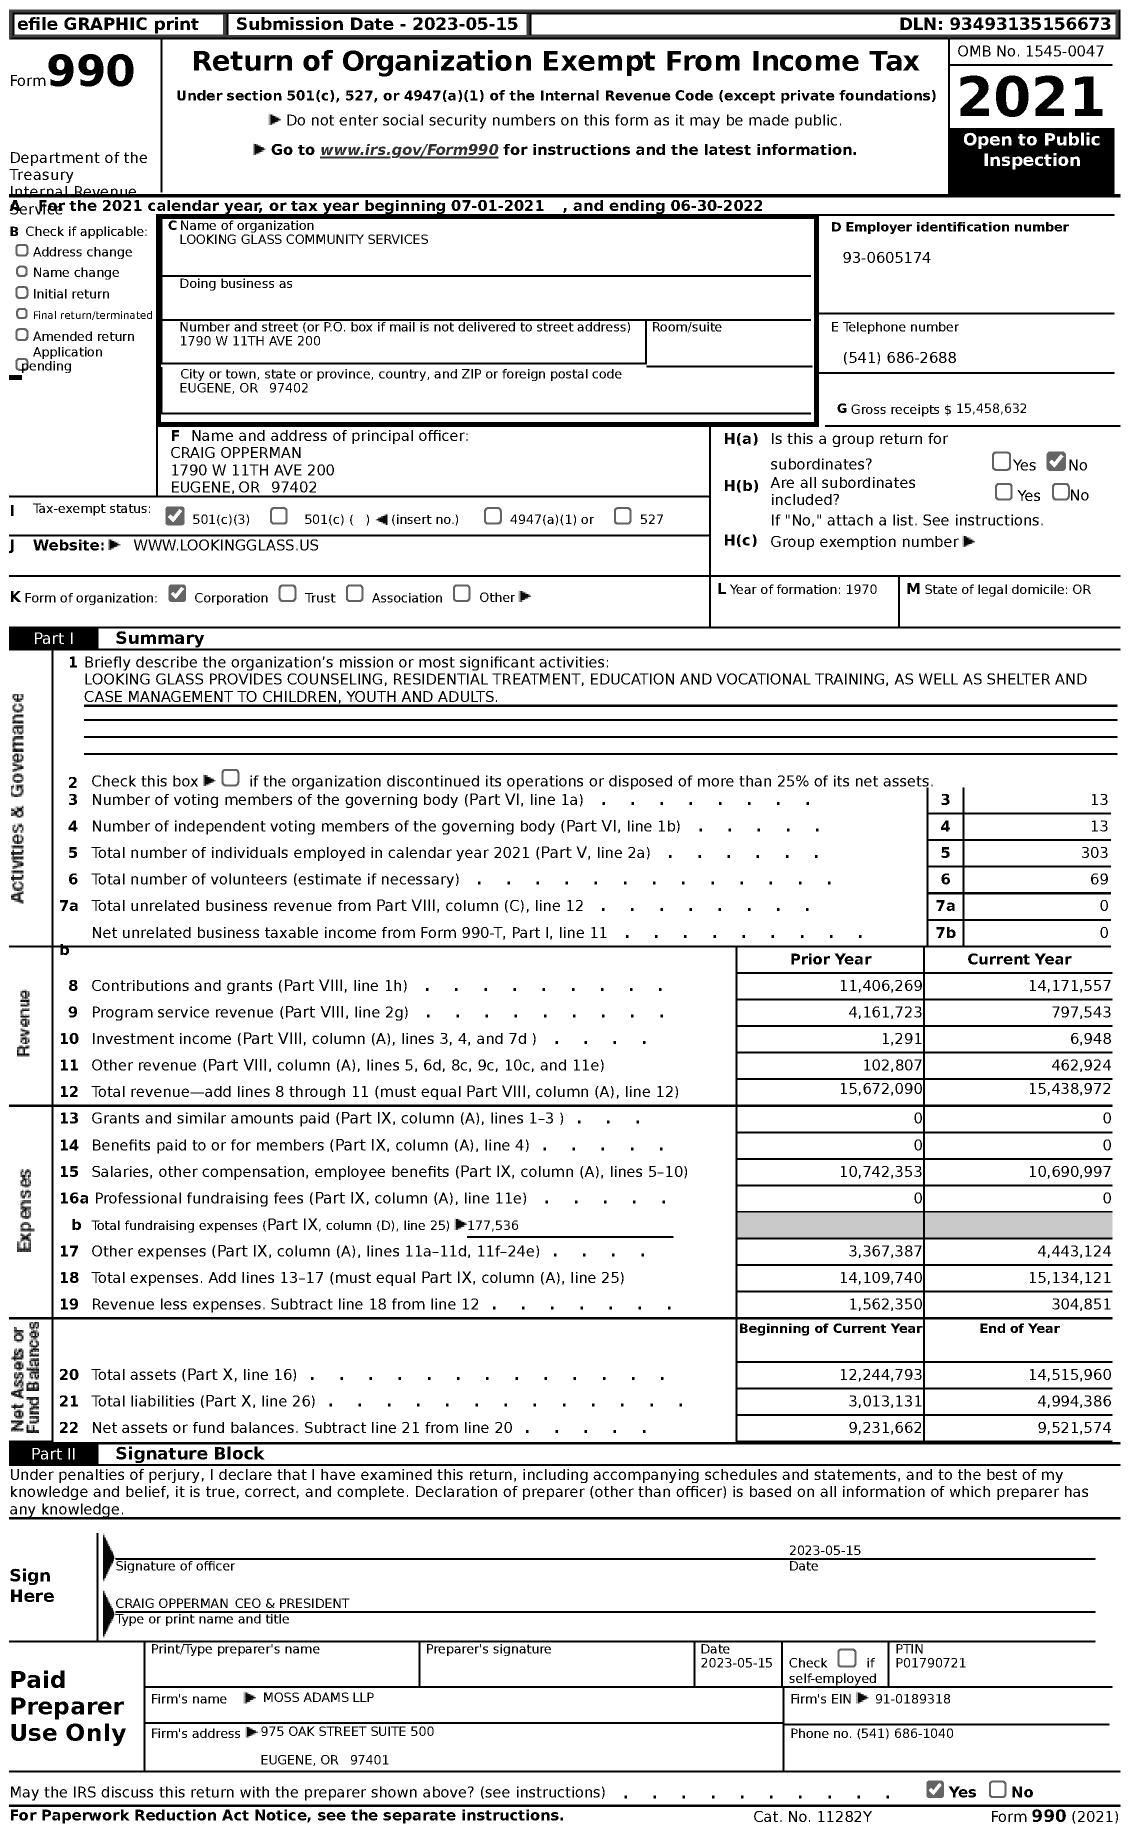 Image of first page of 2021 Form 990 for Looking Glass Community Services